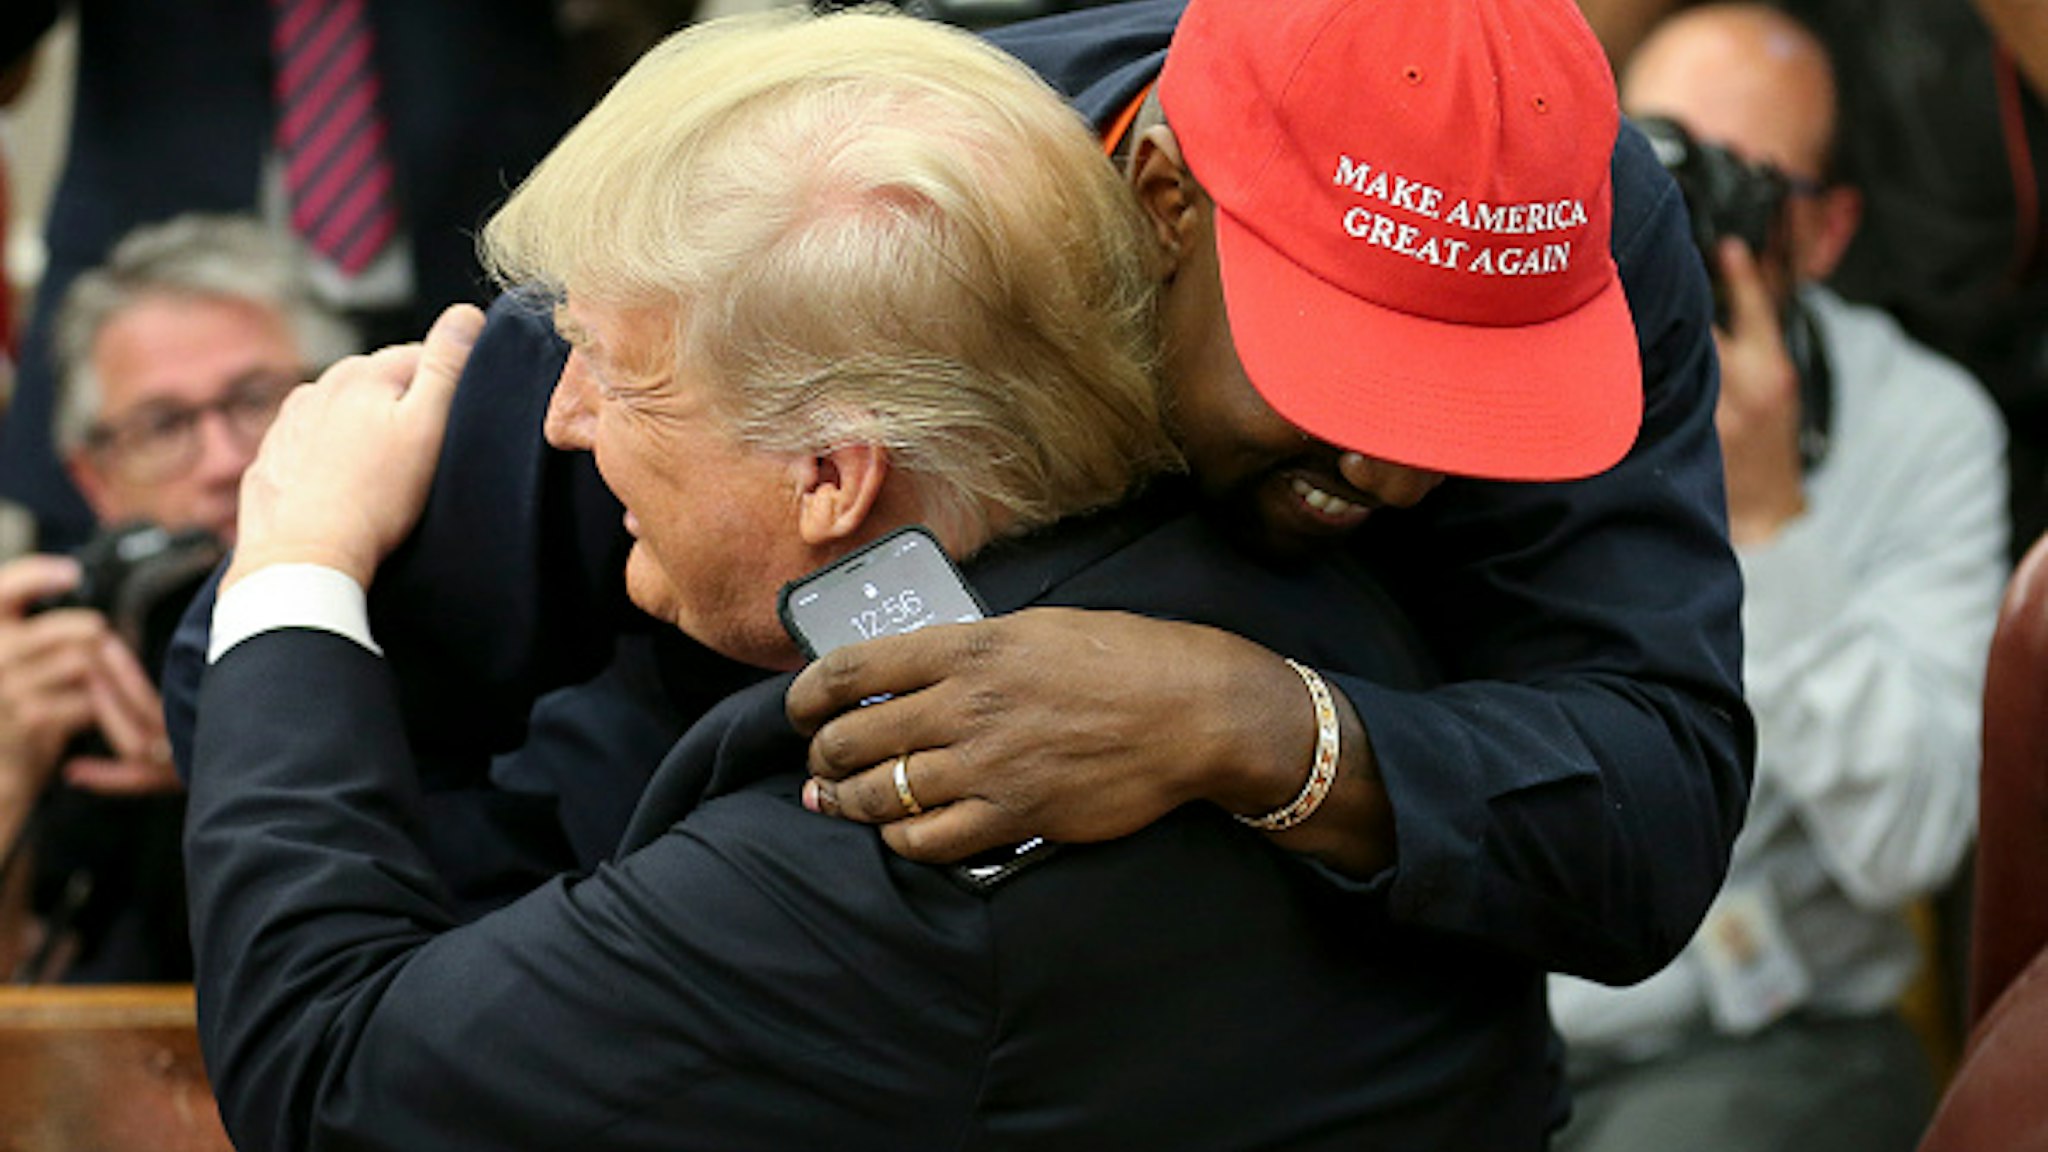 WASHINGTON, DC - OCTOBER 11: (AFP OUT) (EDITORS NOTE: Retransmission with alternate crop.) U.S. President Donald Trump hugs rapper Kanye West during a meeting in the Oval office of the White House on October 11, 2018 in Washington, DC.